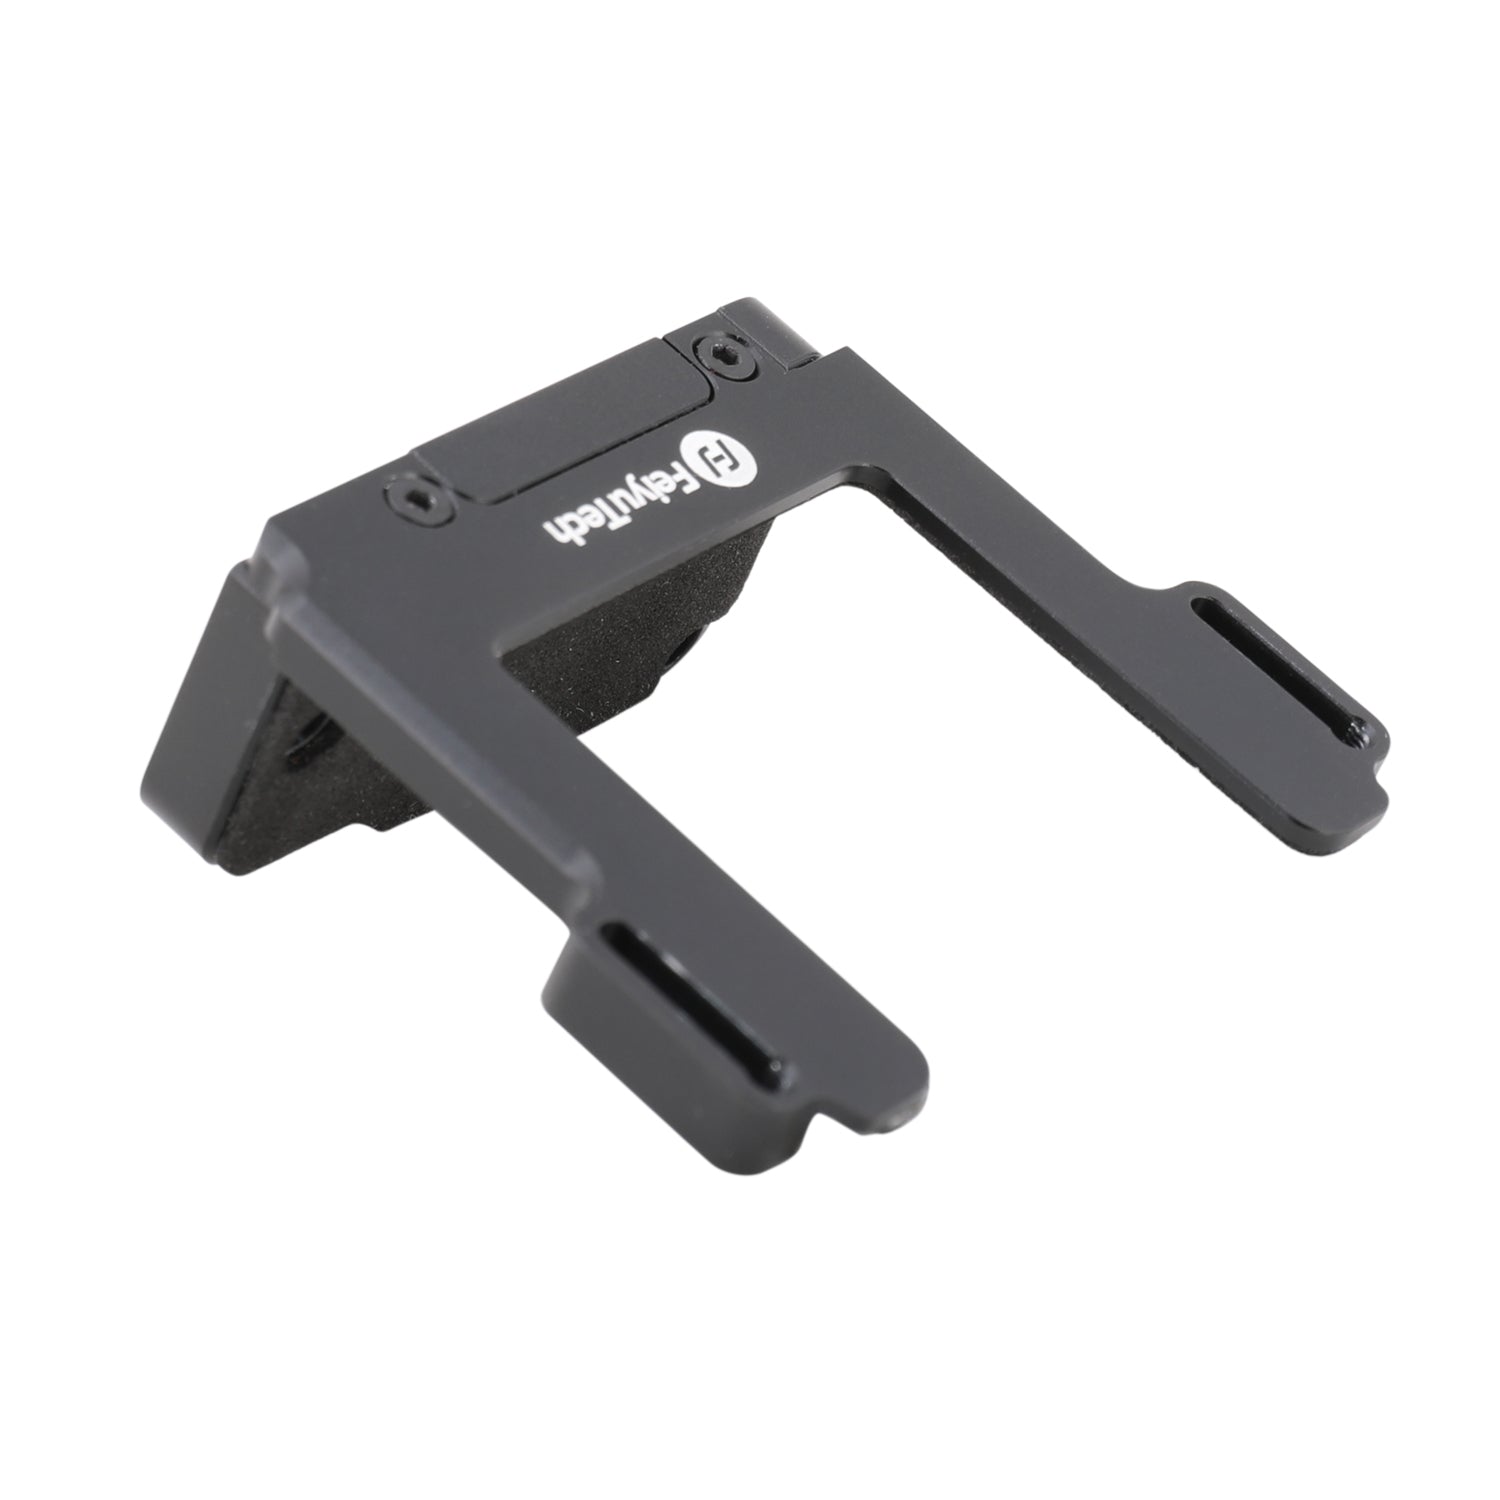 Gopro 8 Mount Adapter for Vimble 2A (Only ship to US&CA)